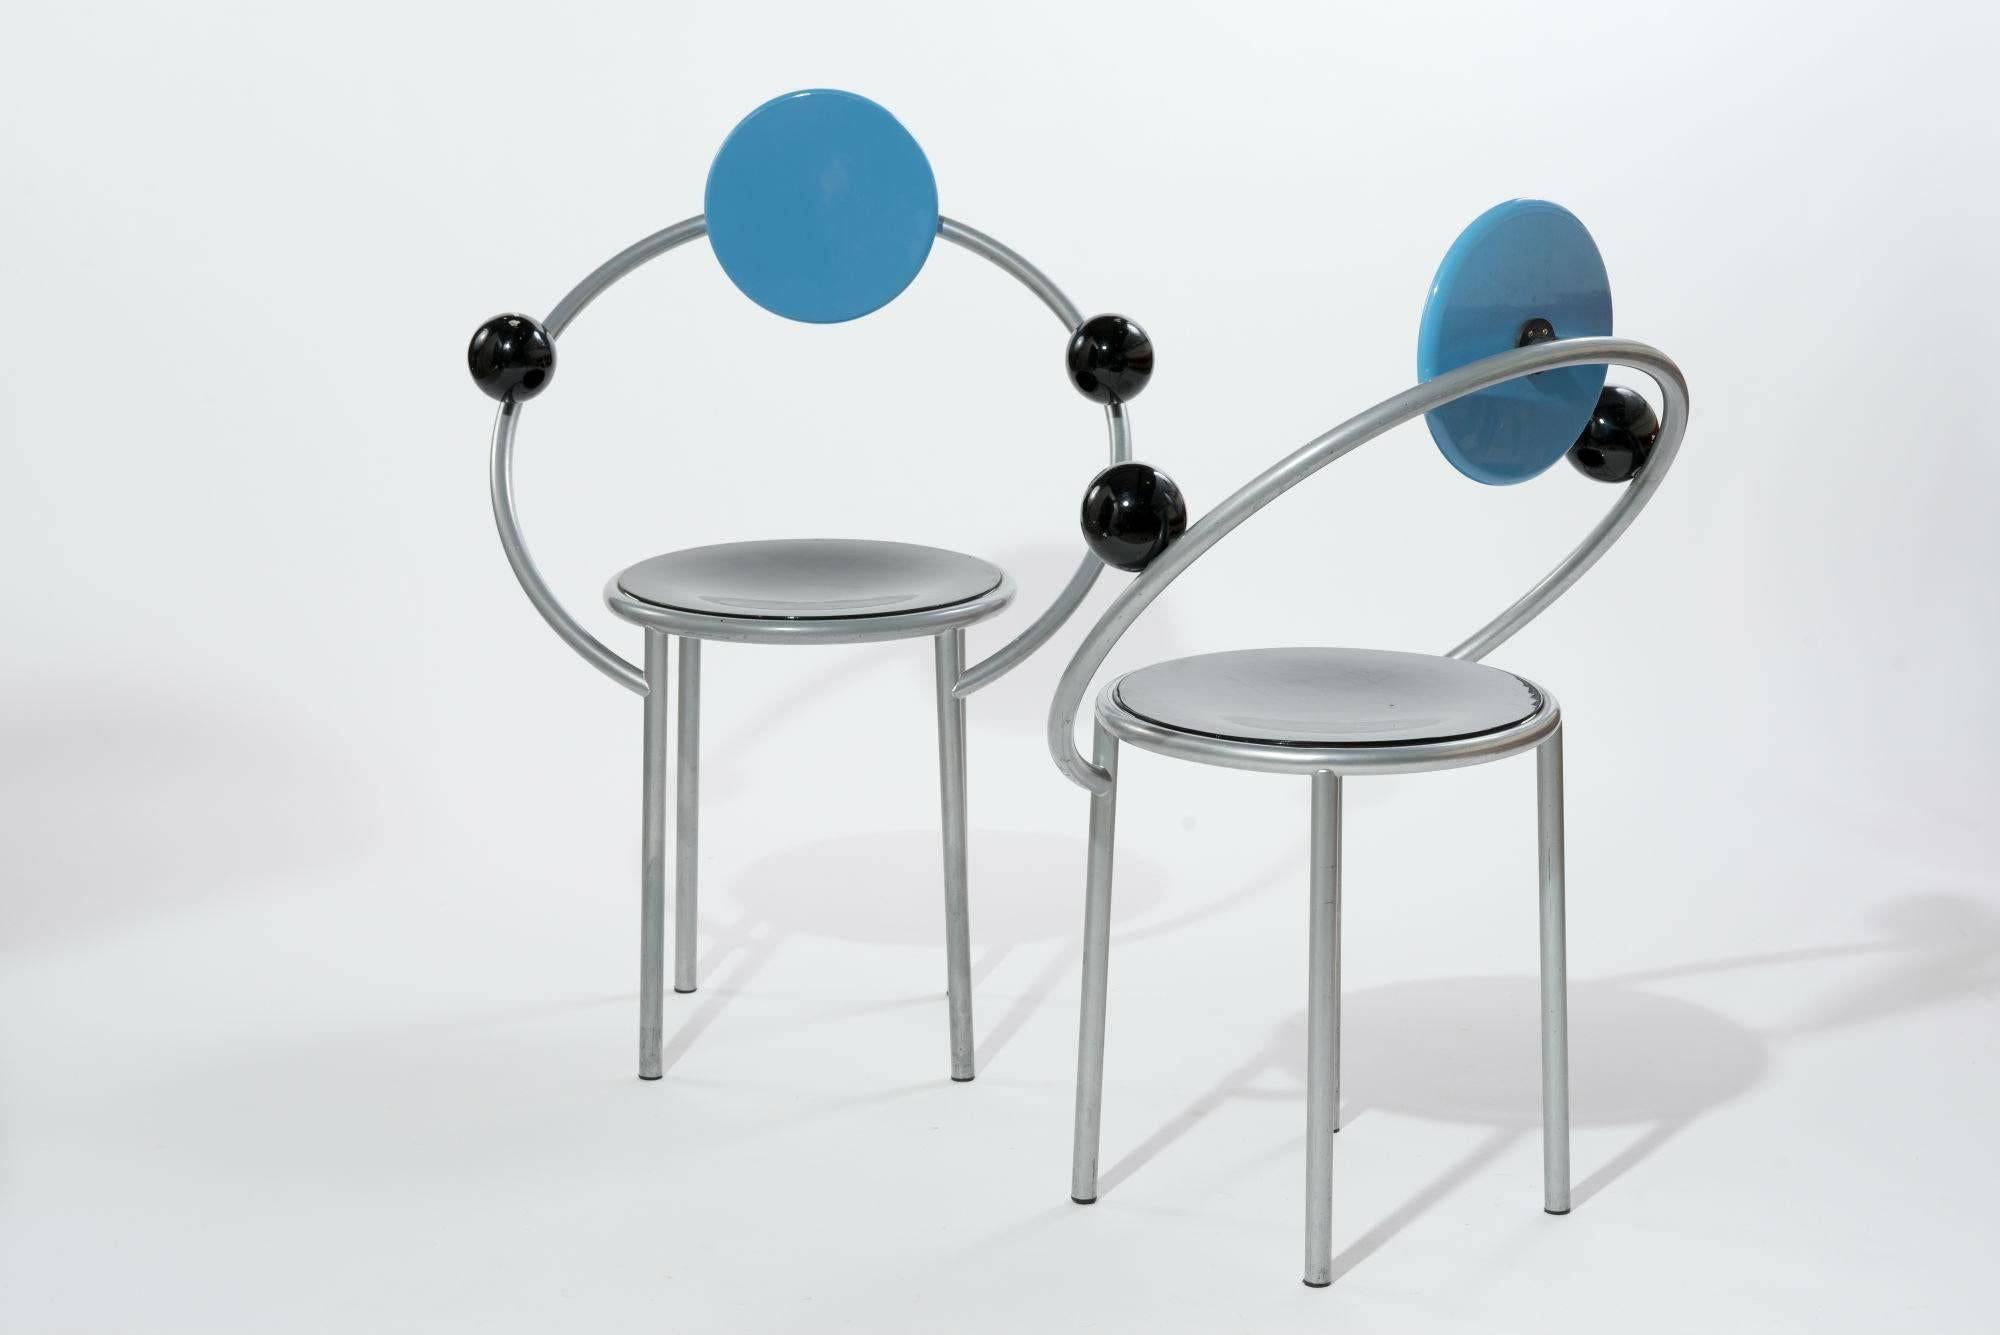 Pair of 'First' chairs, designed in the early 1980s by Michele De Lucchi, one of the founders of Memphis Milano and was in fact the first chair that was produced by the now legendary design collective. This post modern design features a round atomic